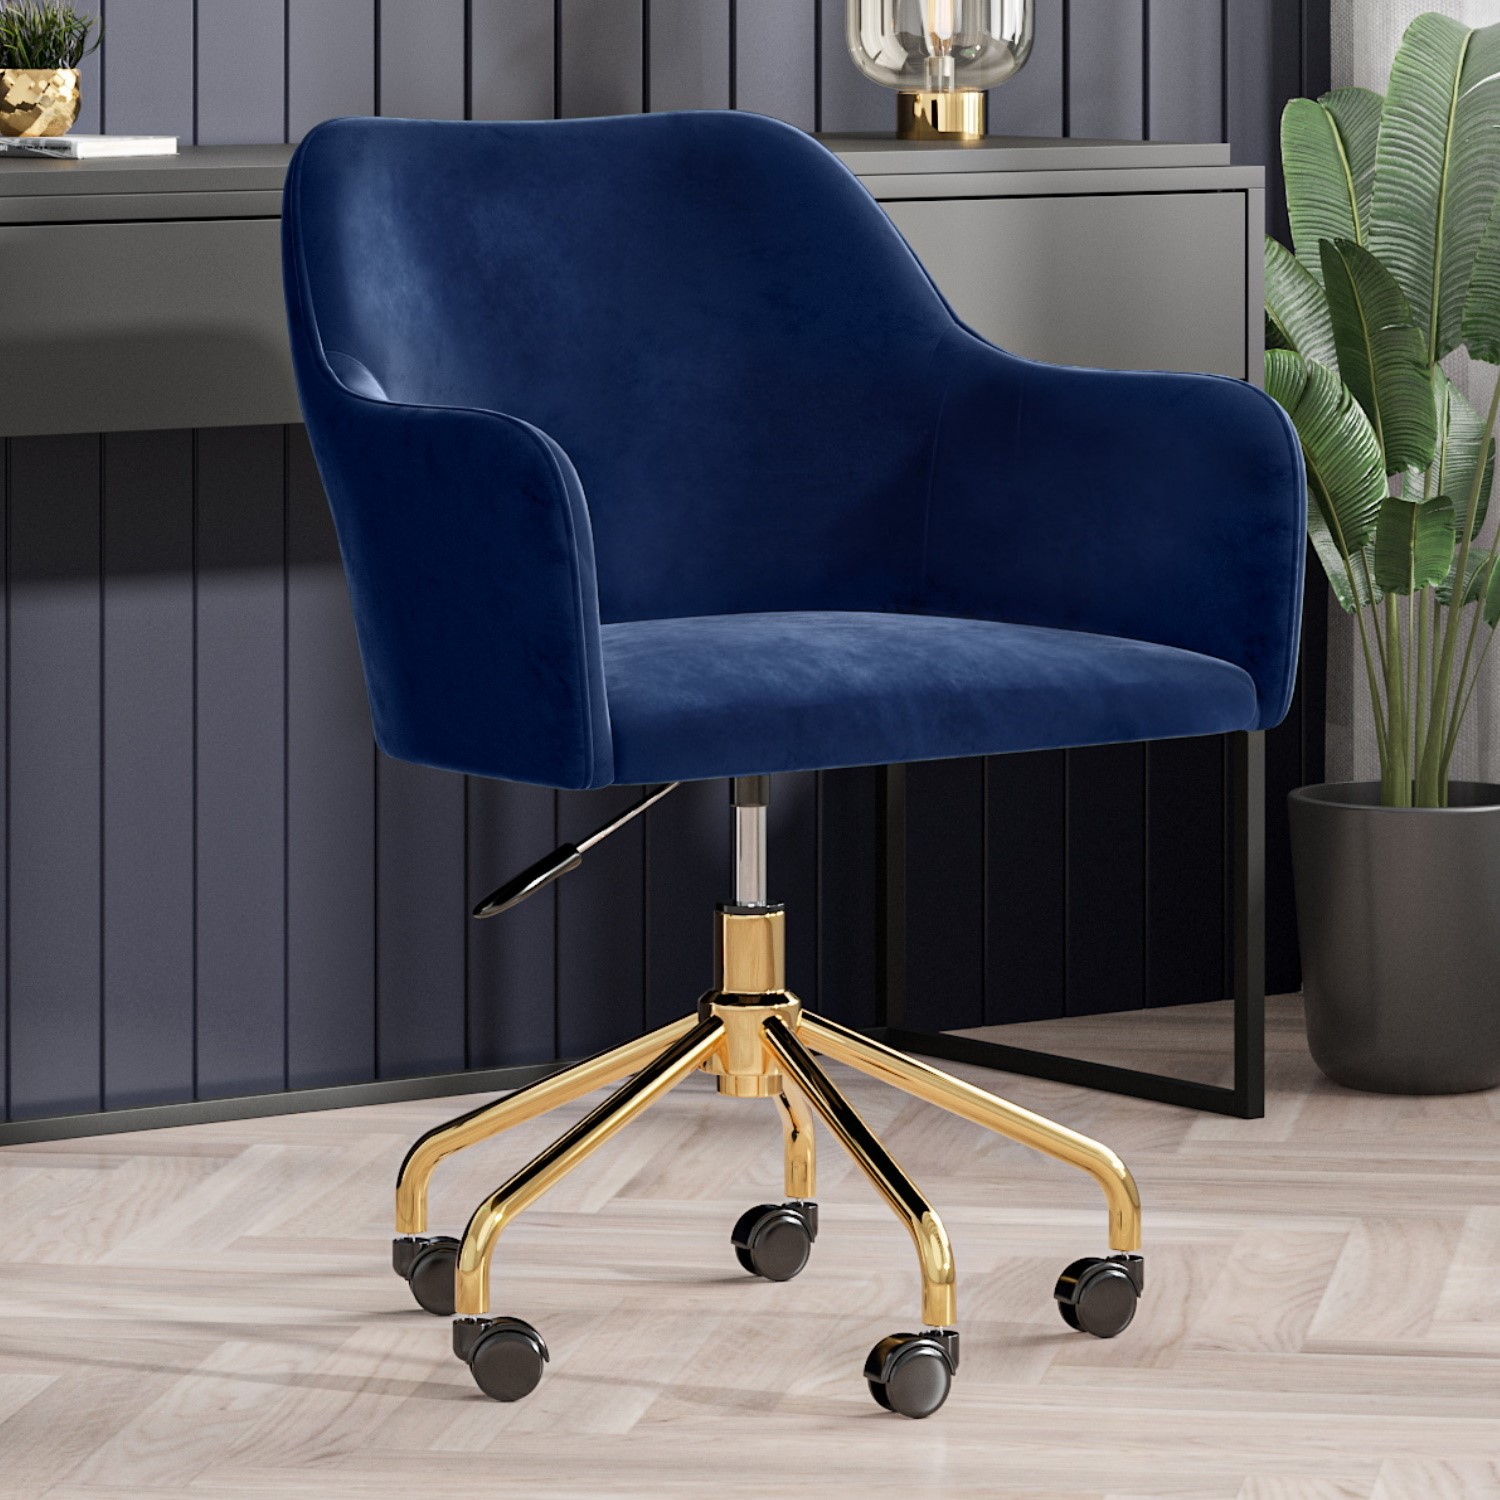 Navy Velvet Office Chair with Arms - Marley - Furniture123